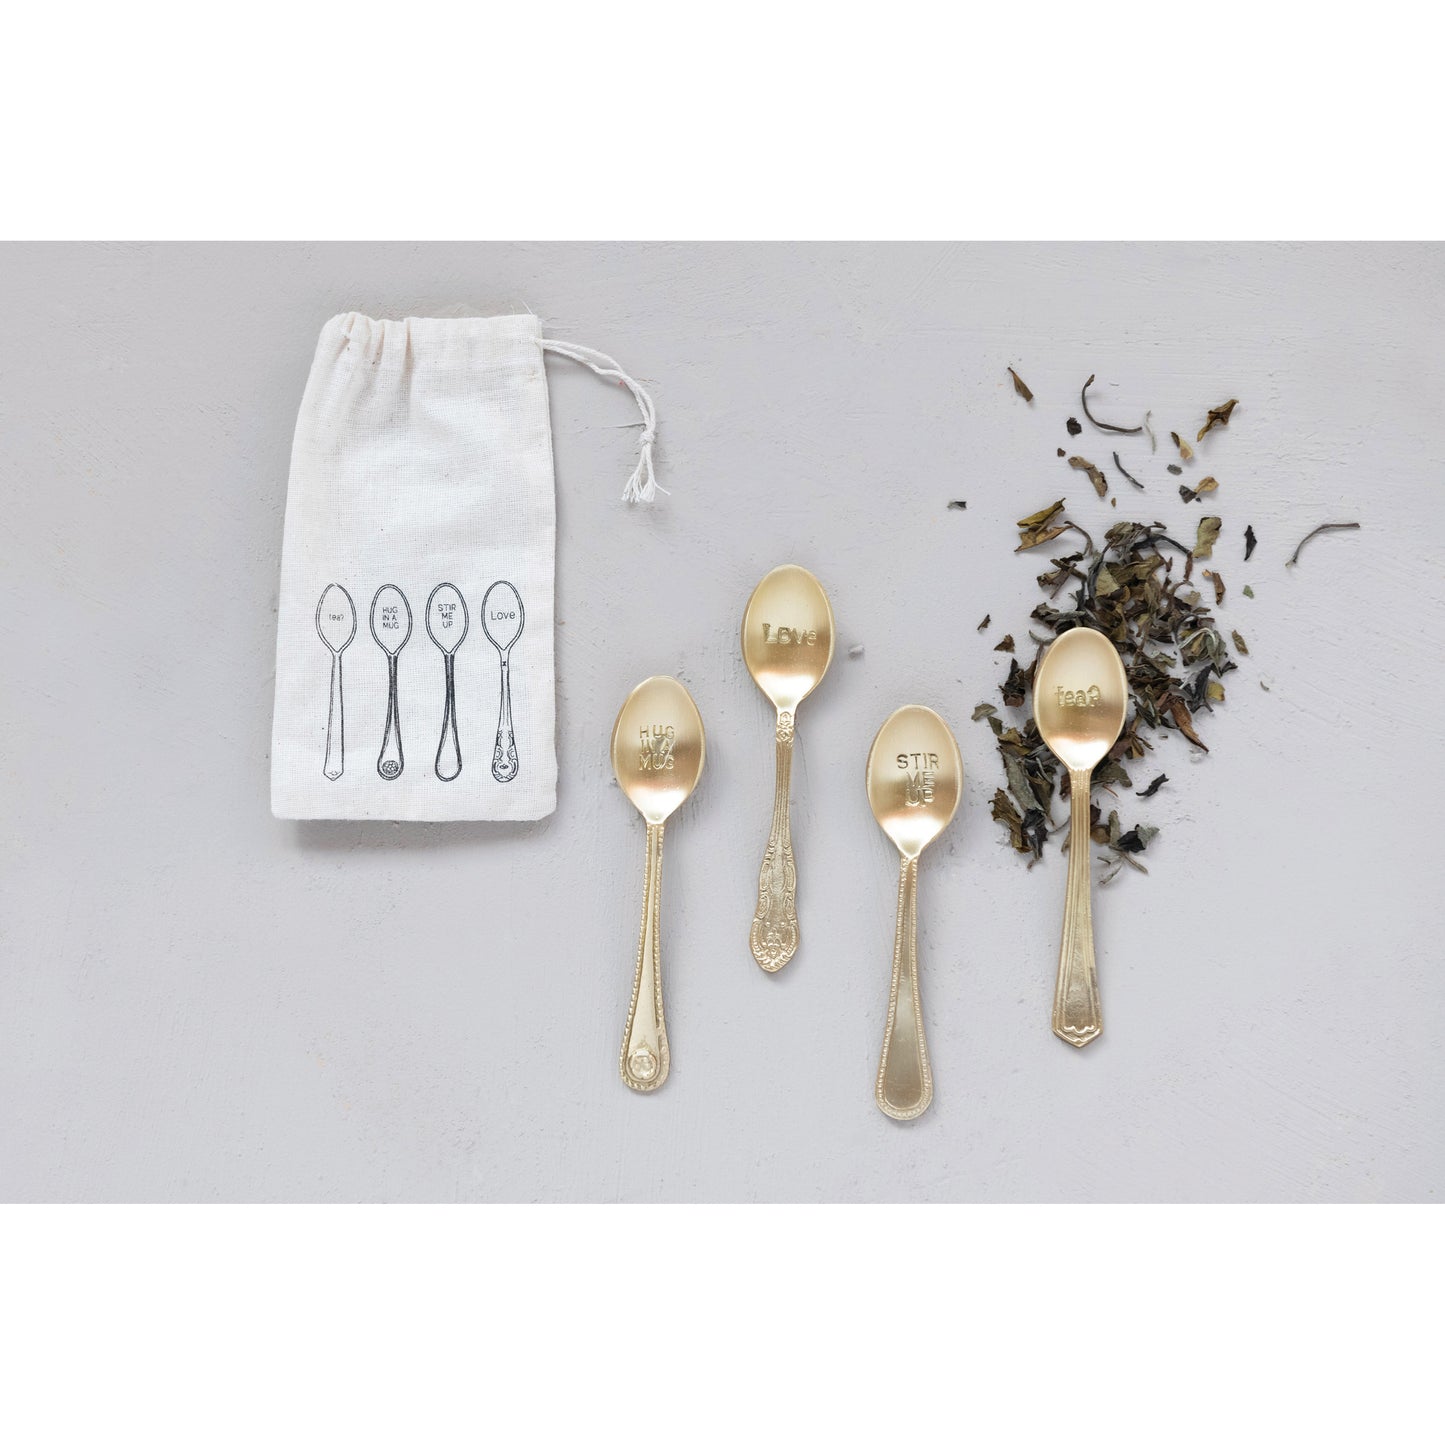 Set of Engraved Brass Spoons